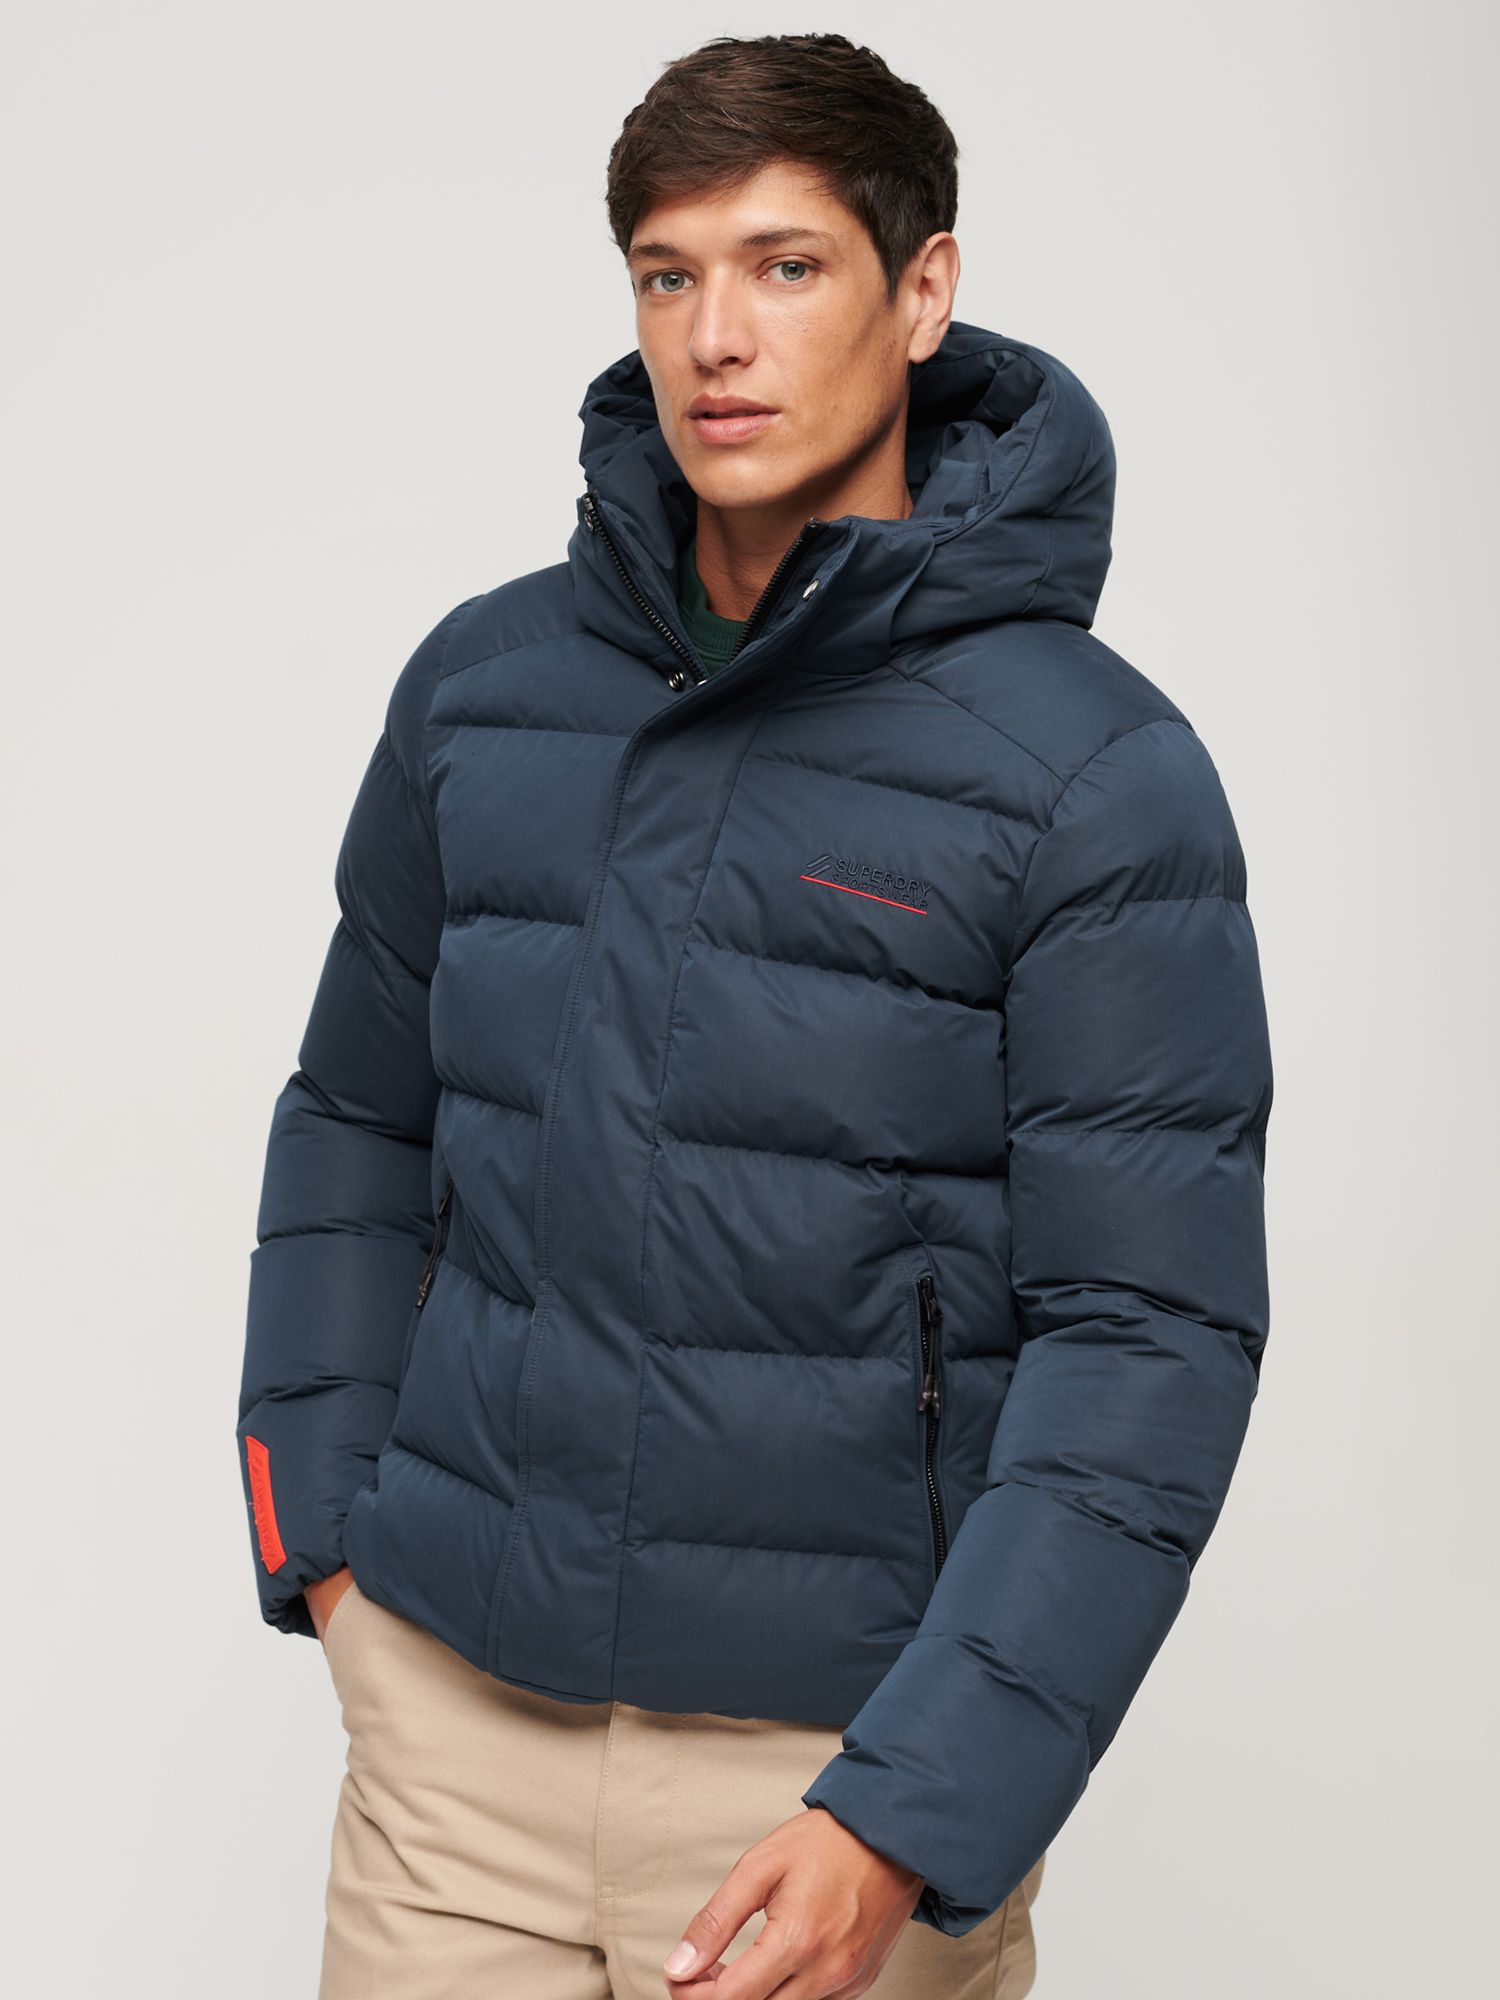 Superdry Hooded Microfibre Sports Puffer Jacket, Baltic Blue at